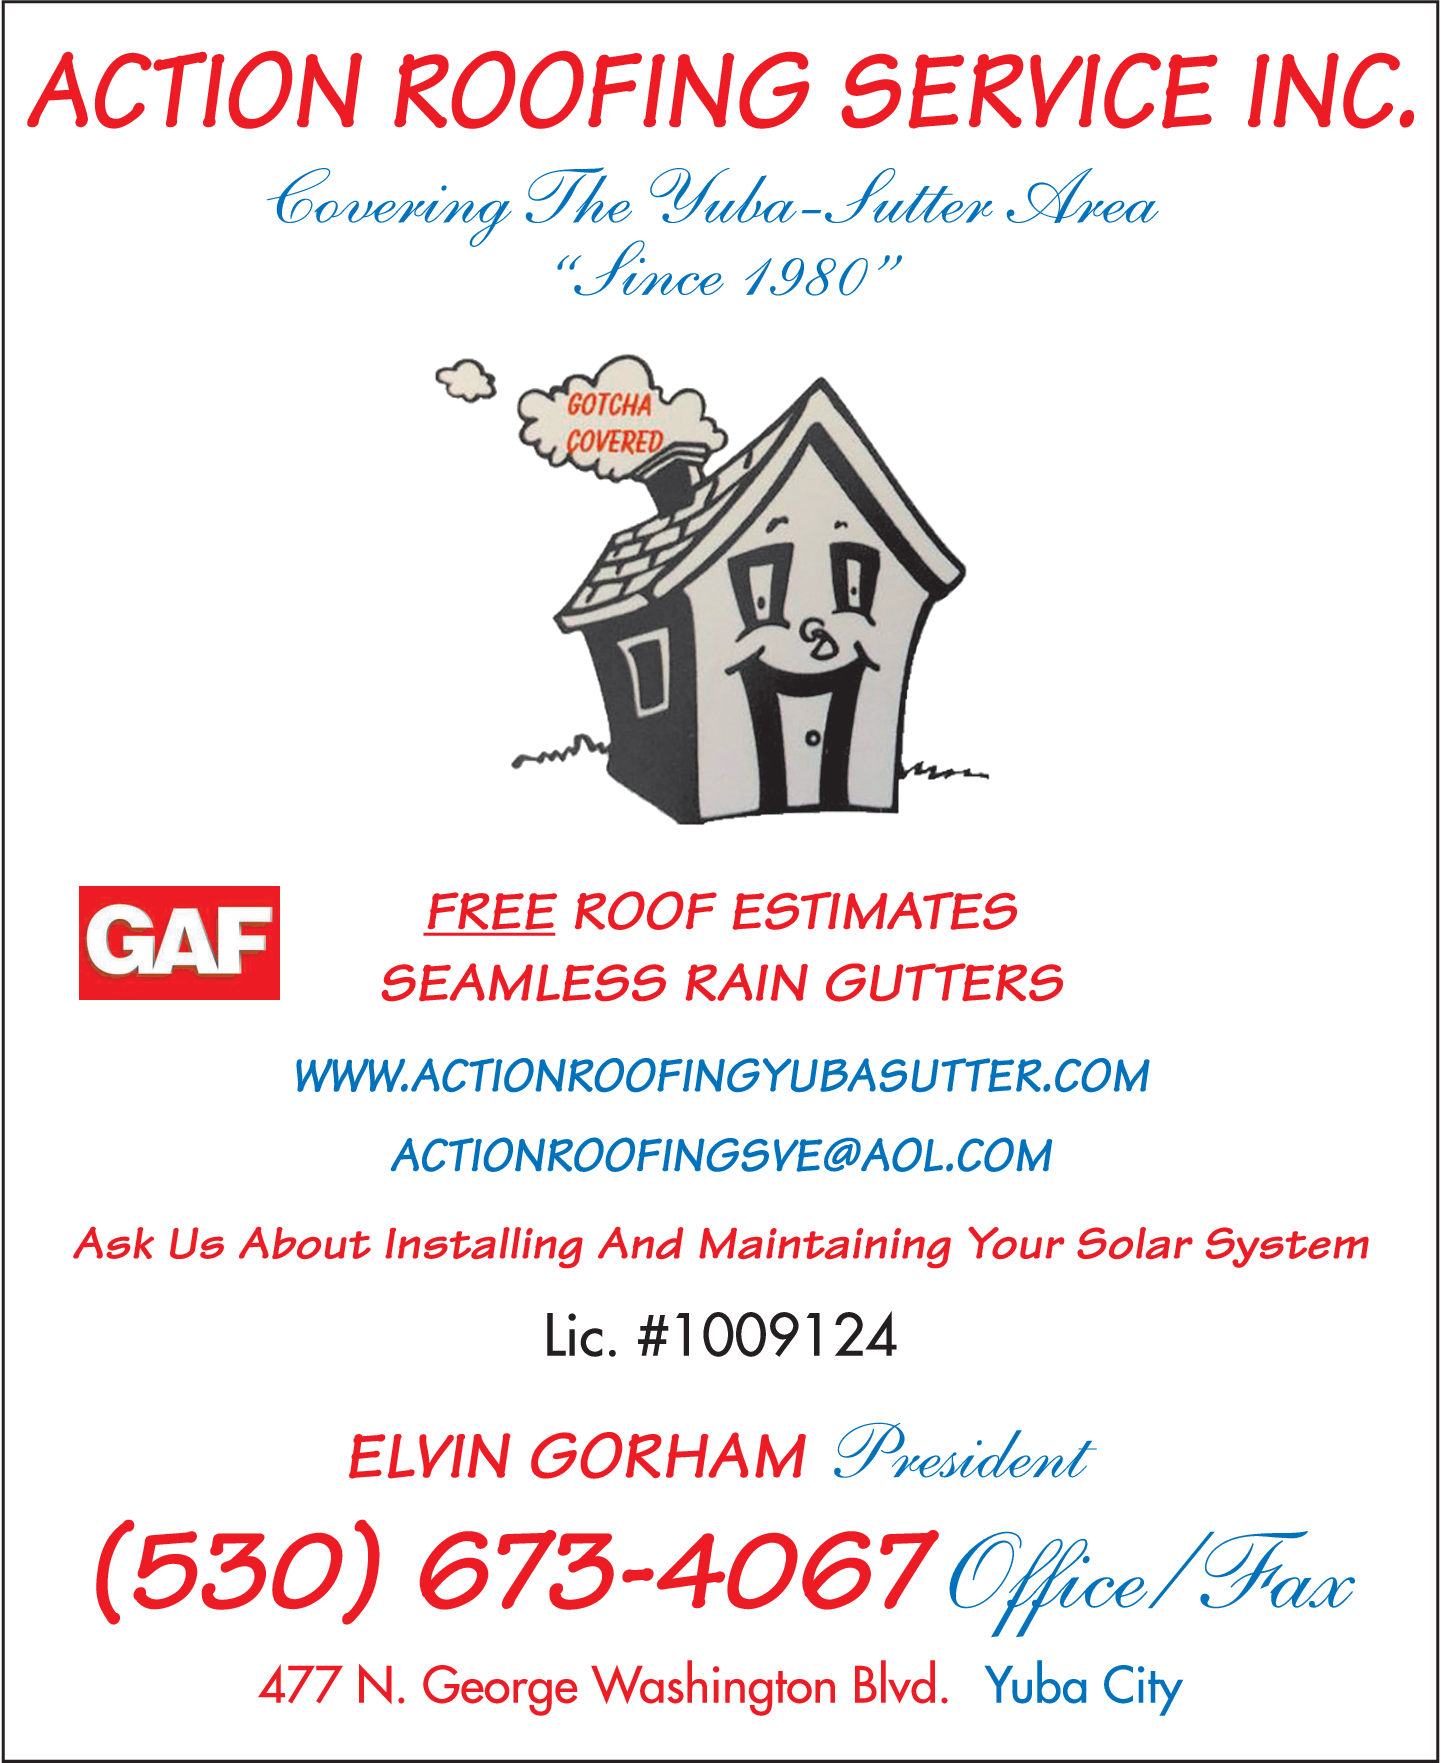 Action Roofing Service